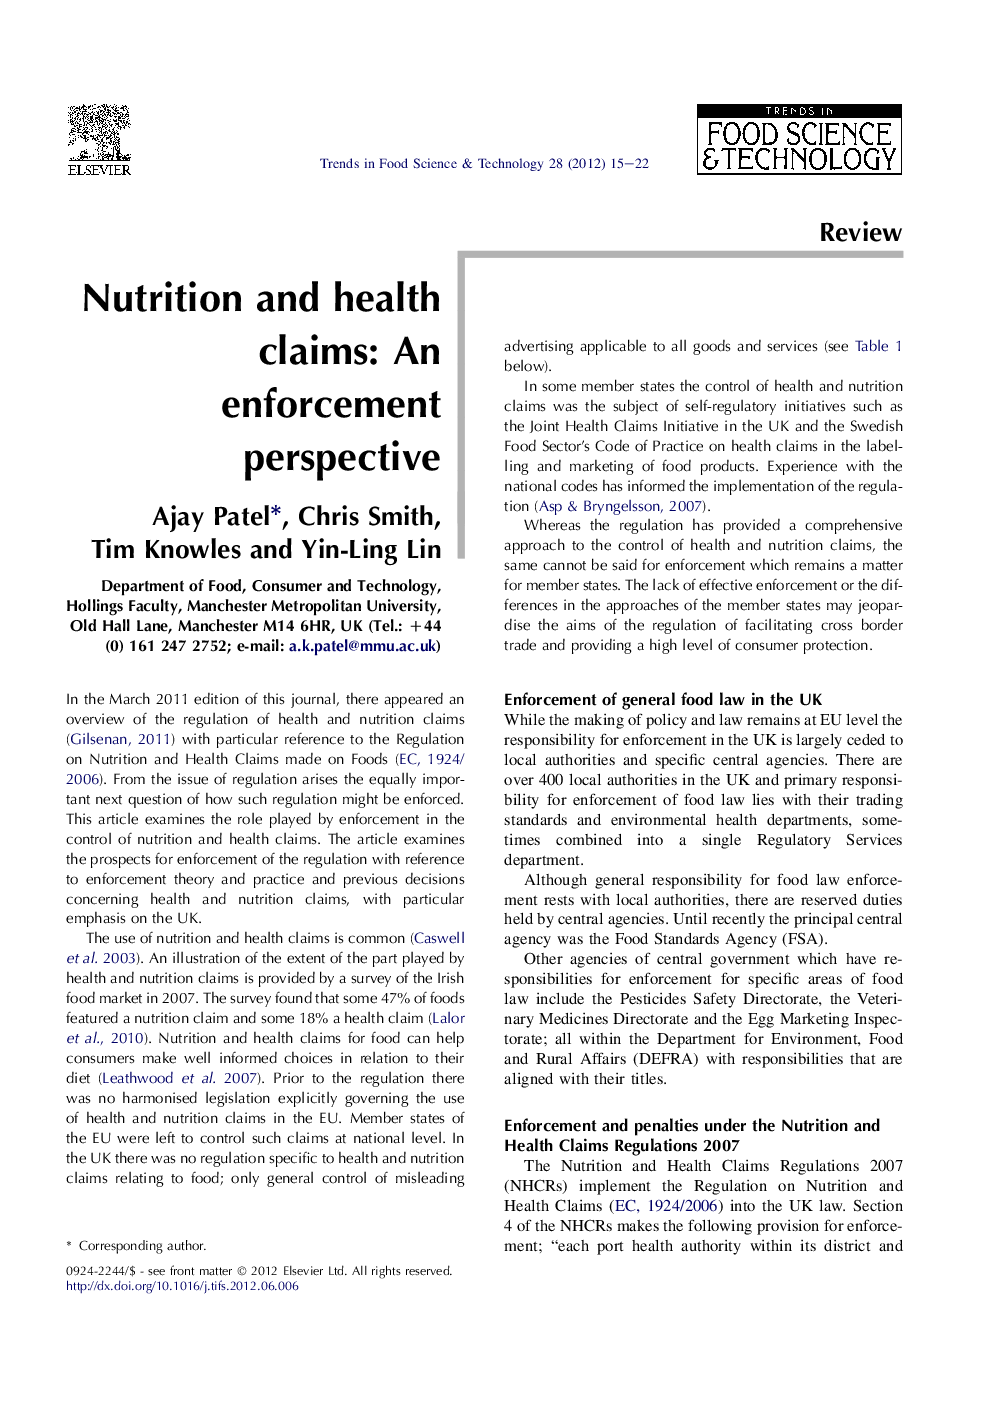 Nutrition and health claims: An enforcement perspective